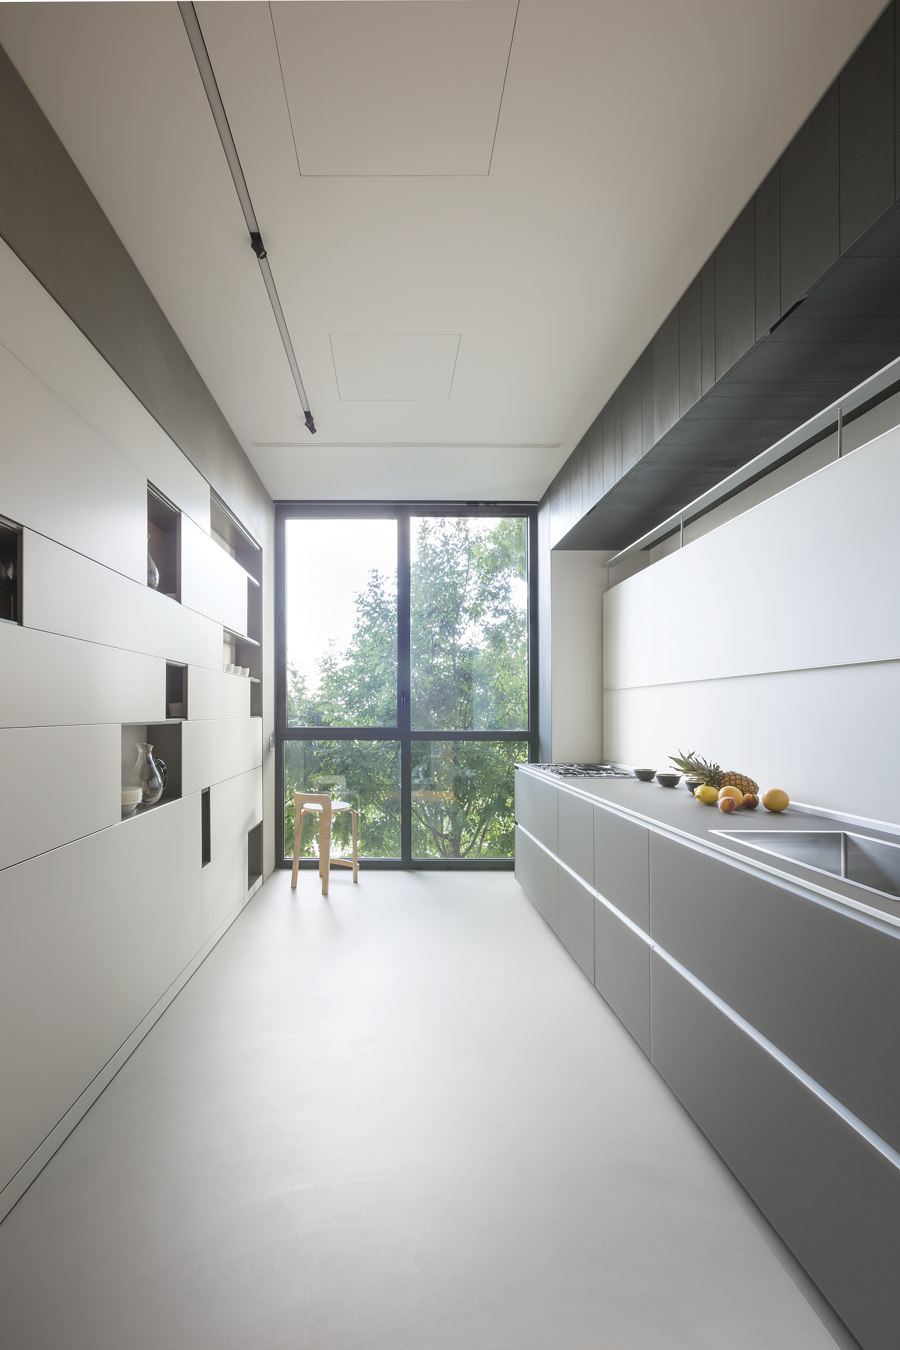 Valcucine in a project by Egidio Panzera at Bosco Verticale by Valcucine | Manufacturer references